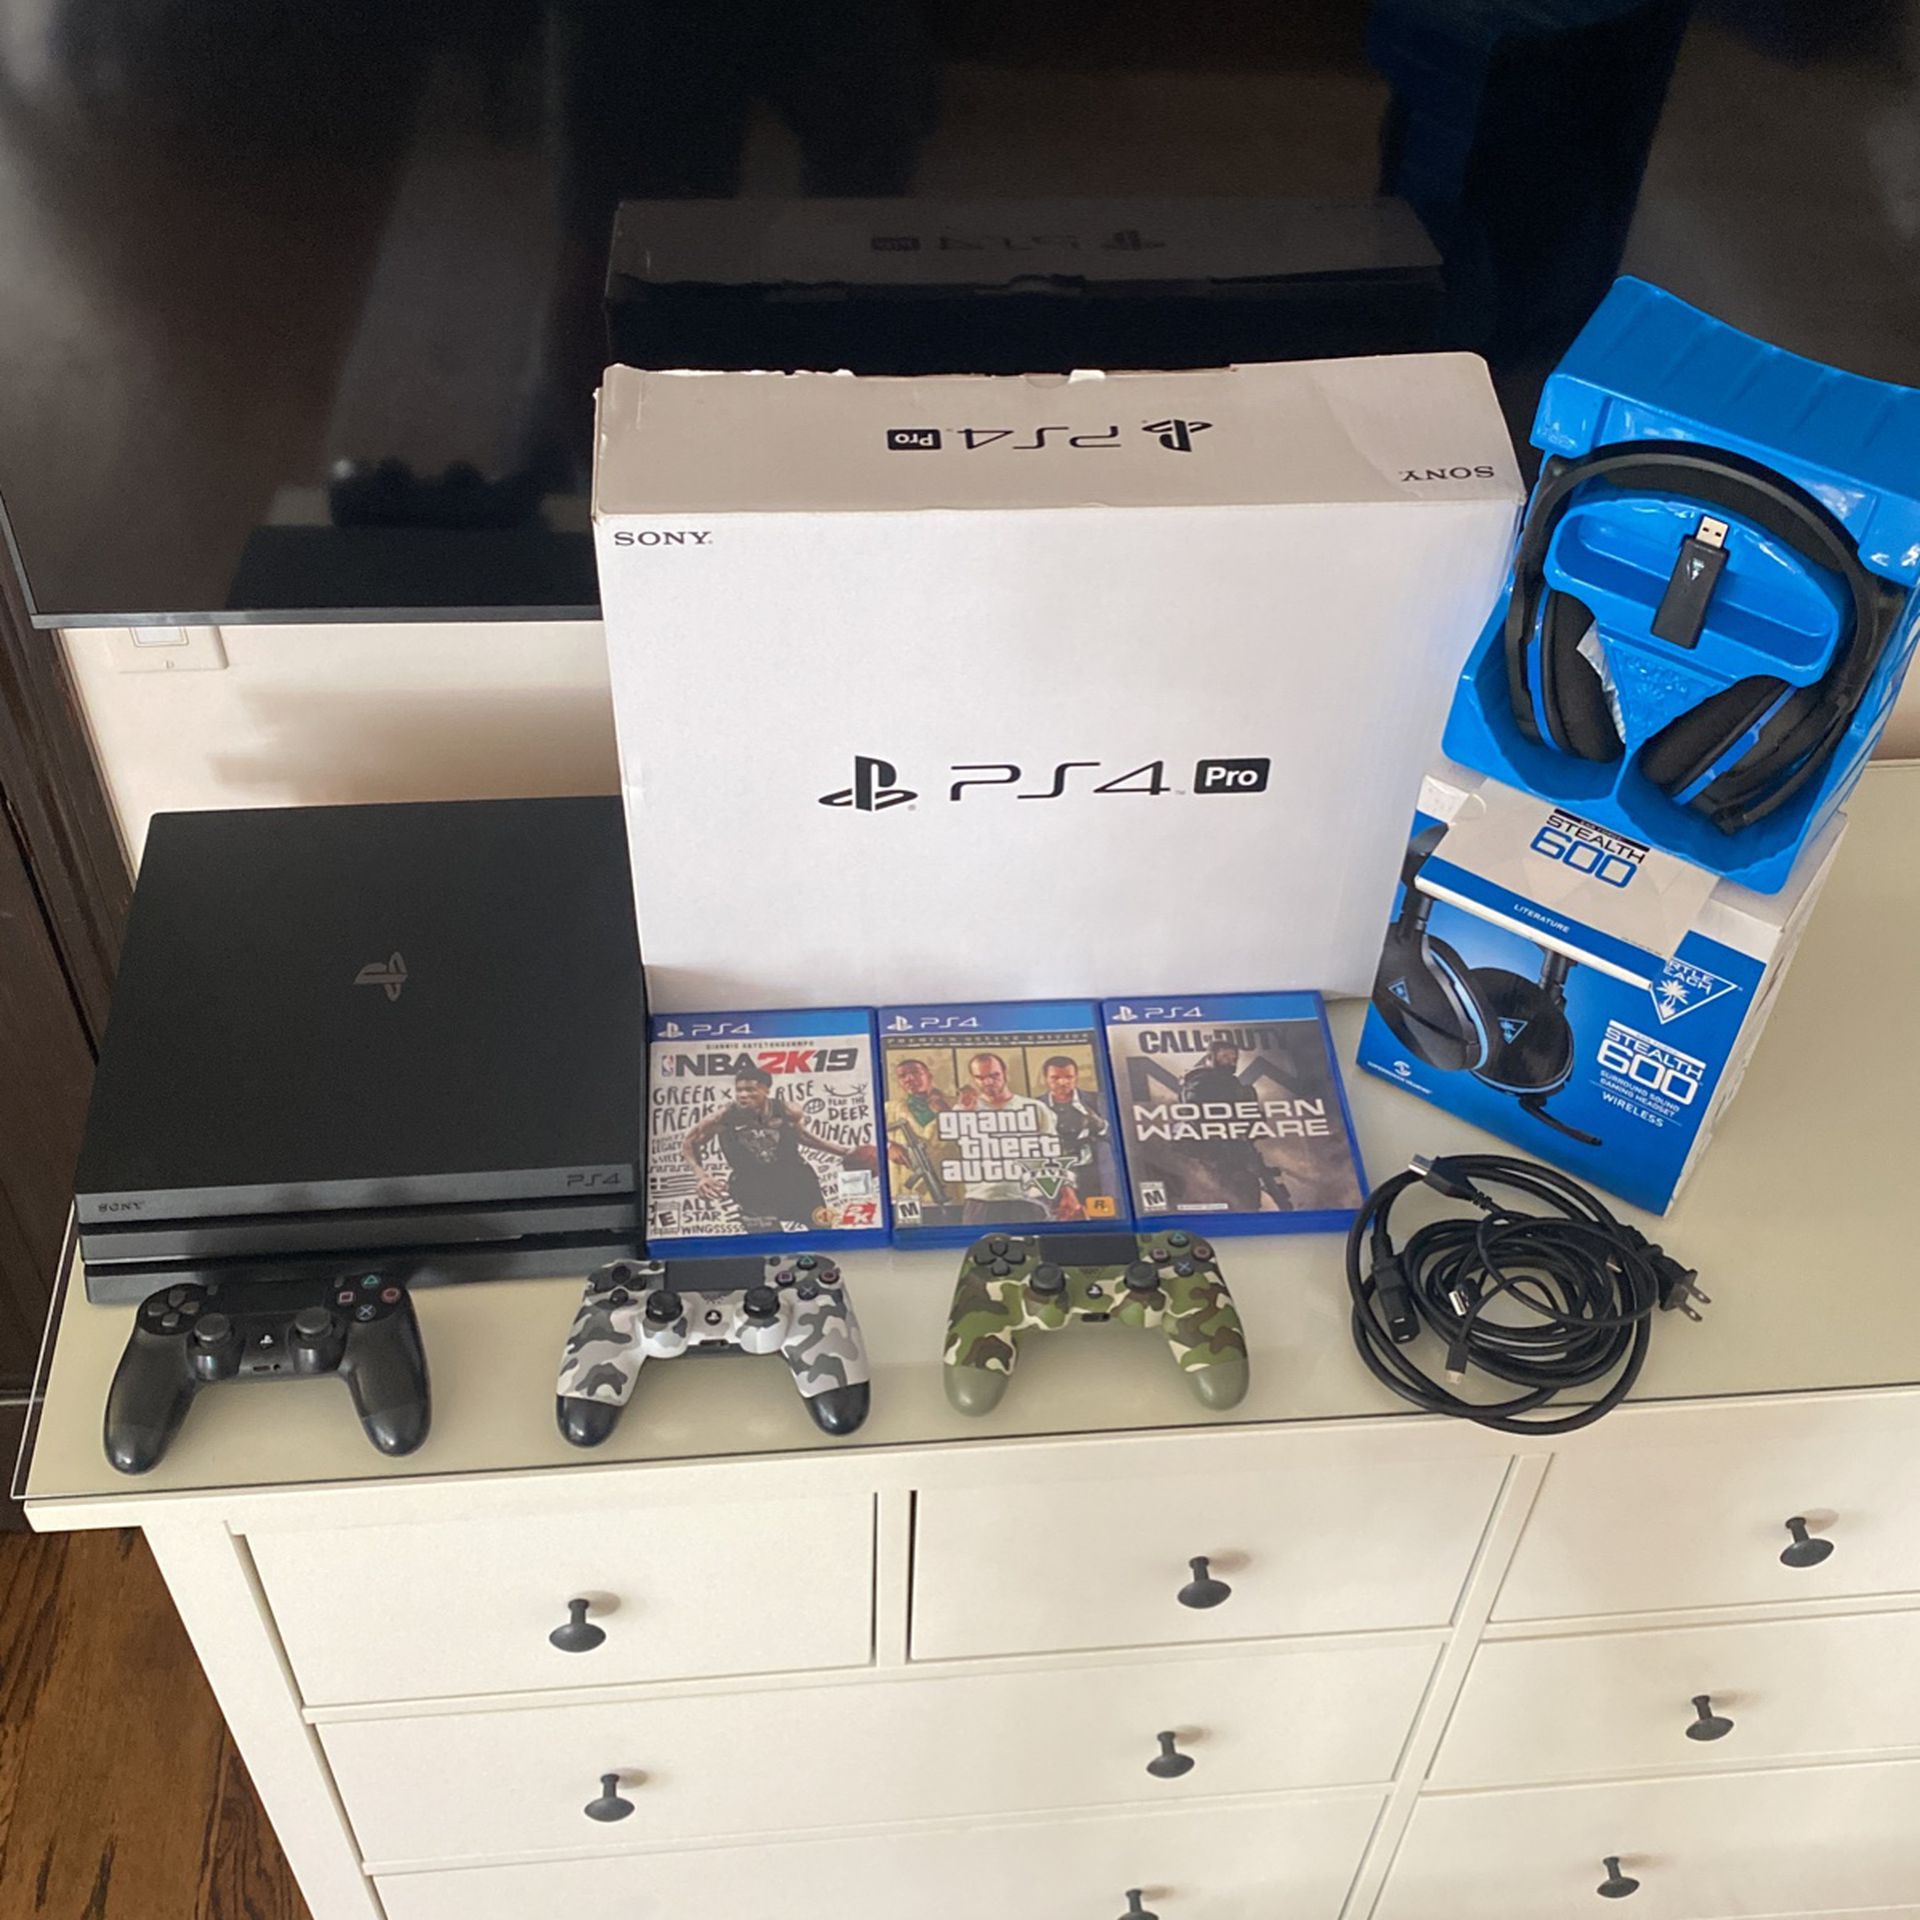 Ps4 Pro 1TB Includes 3 Controllers/Turtle Beach Wireless Headset/3 Games